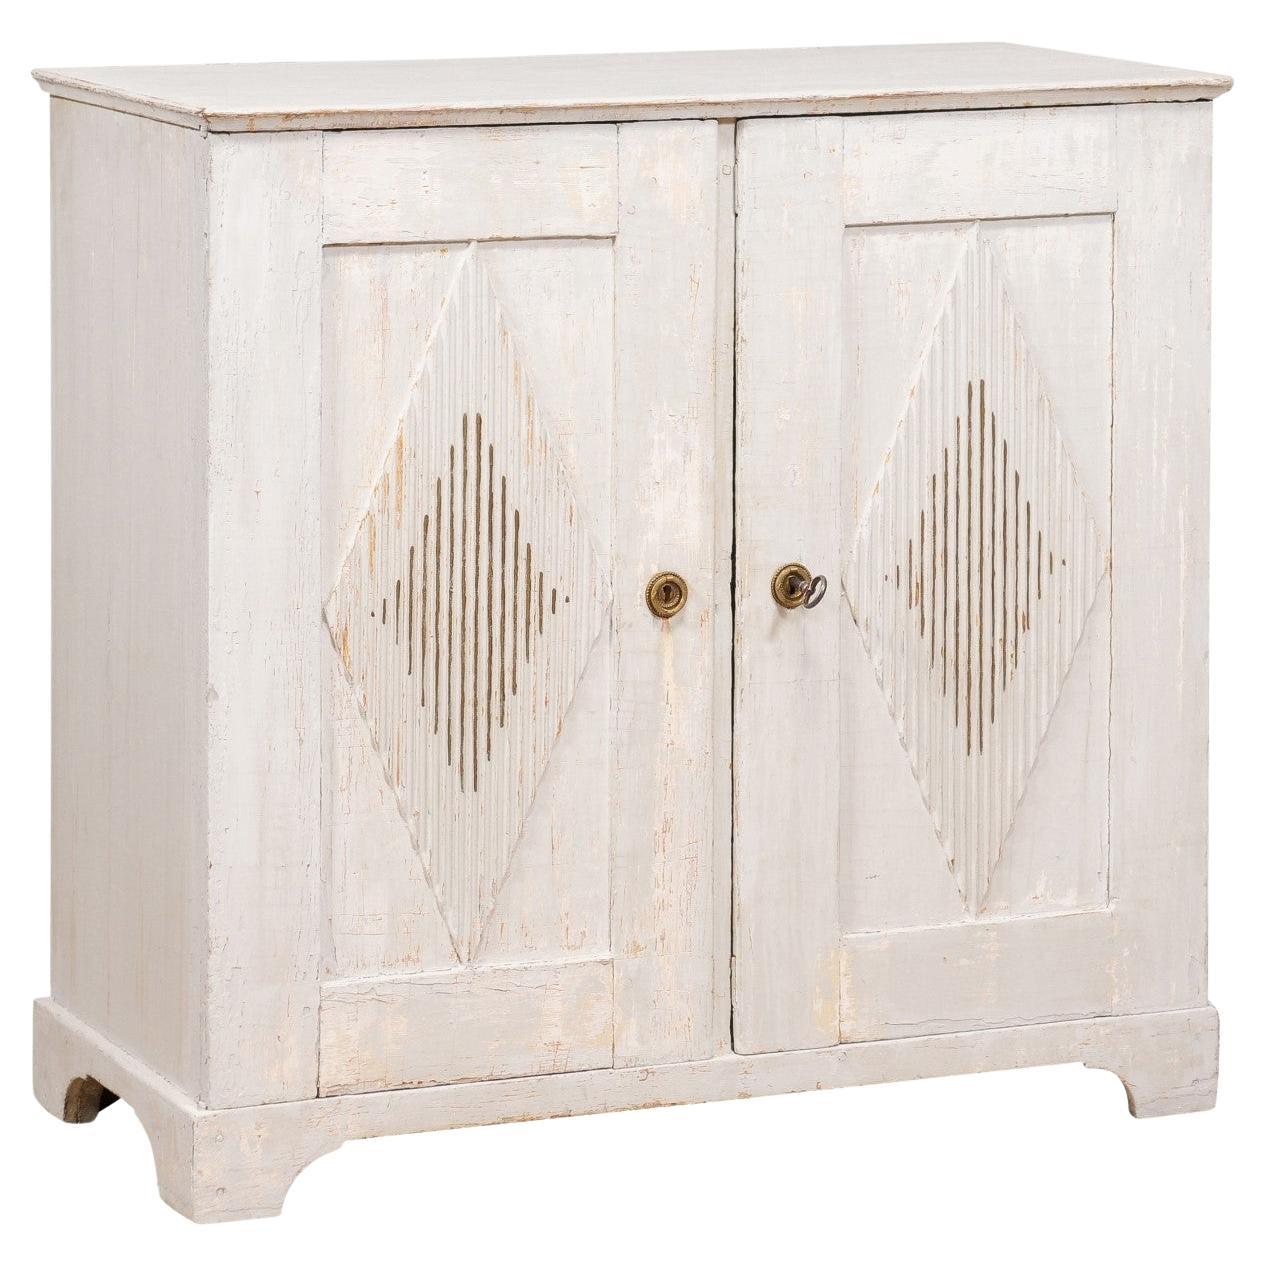 Swedish Gustavian Period 1810s Dove Gray Painted Sideboard with Diamond Motifs For Sale